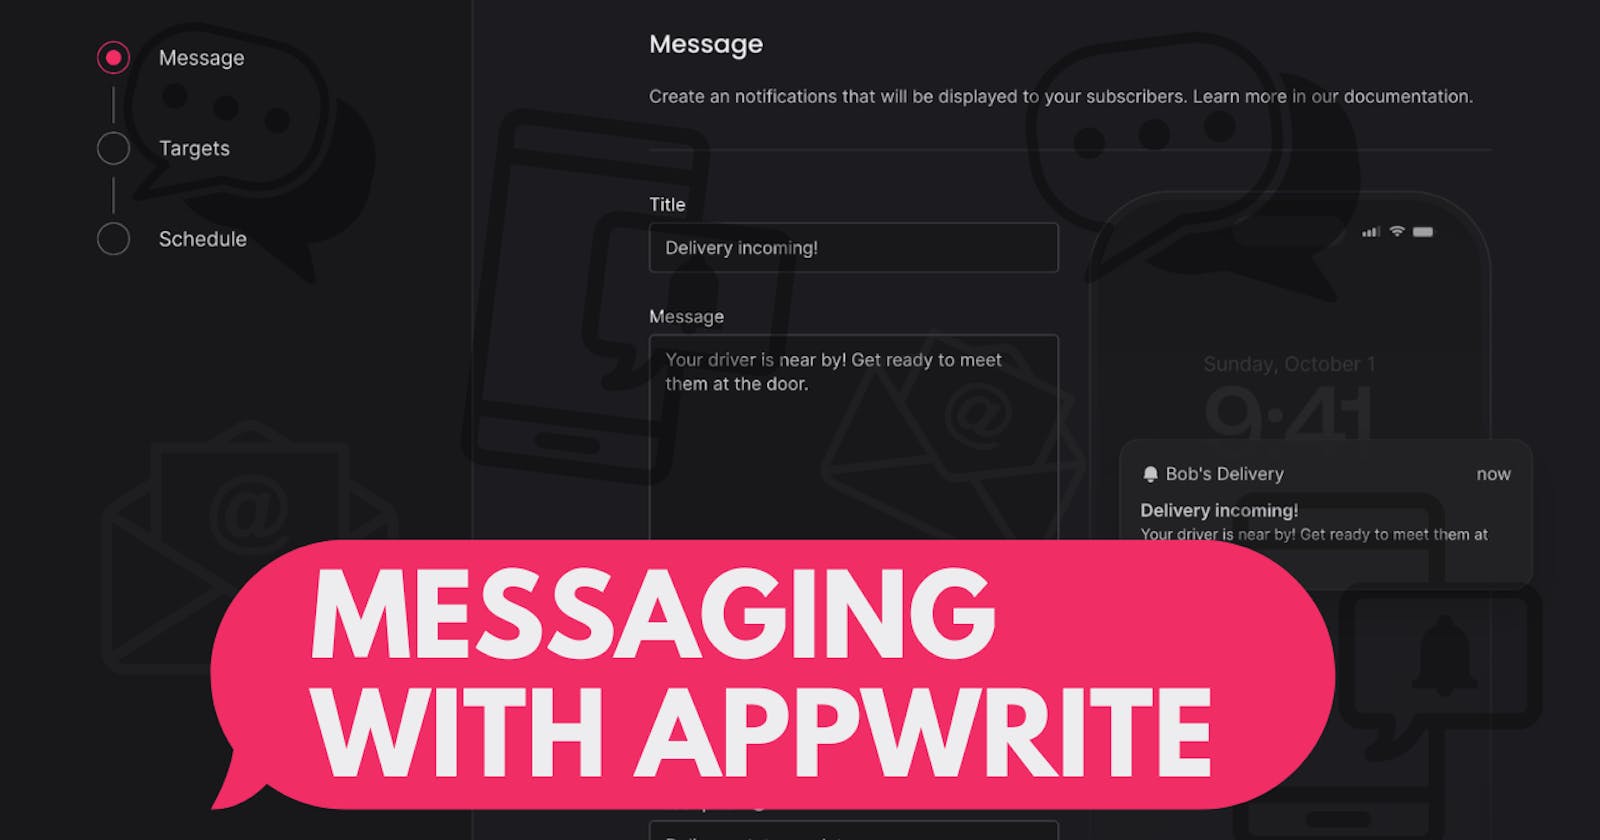 You have a message (from Appwrite)